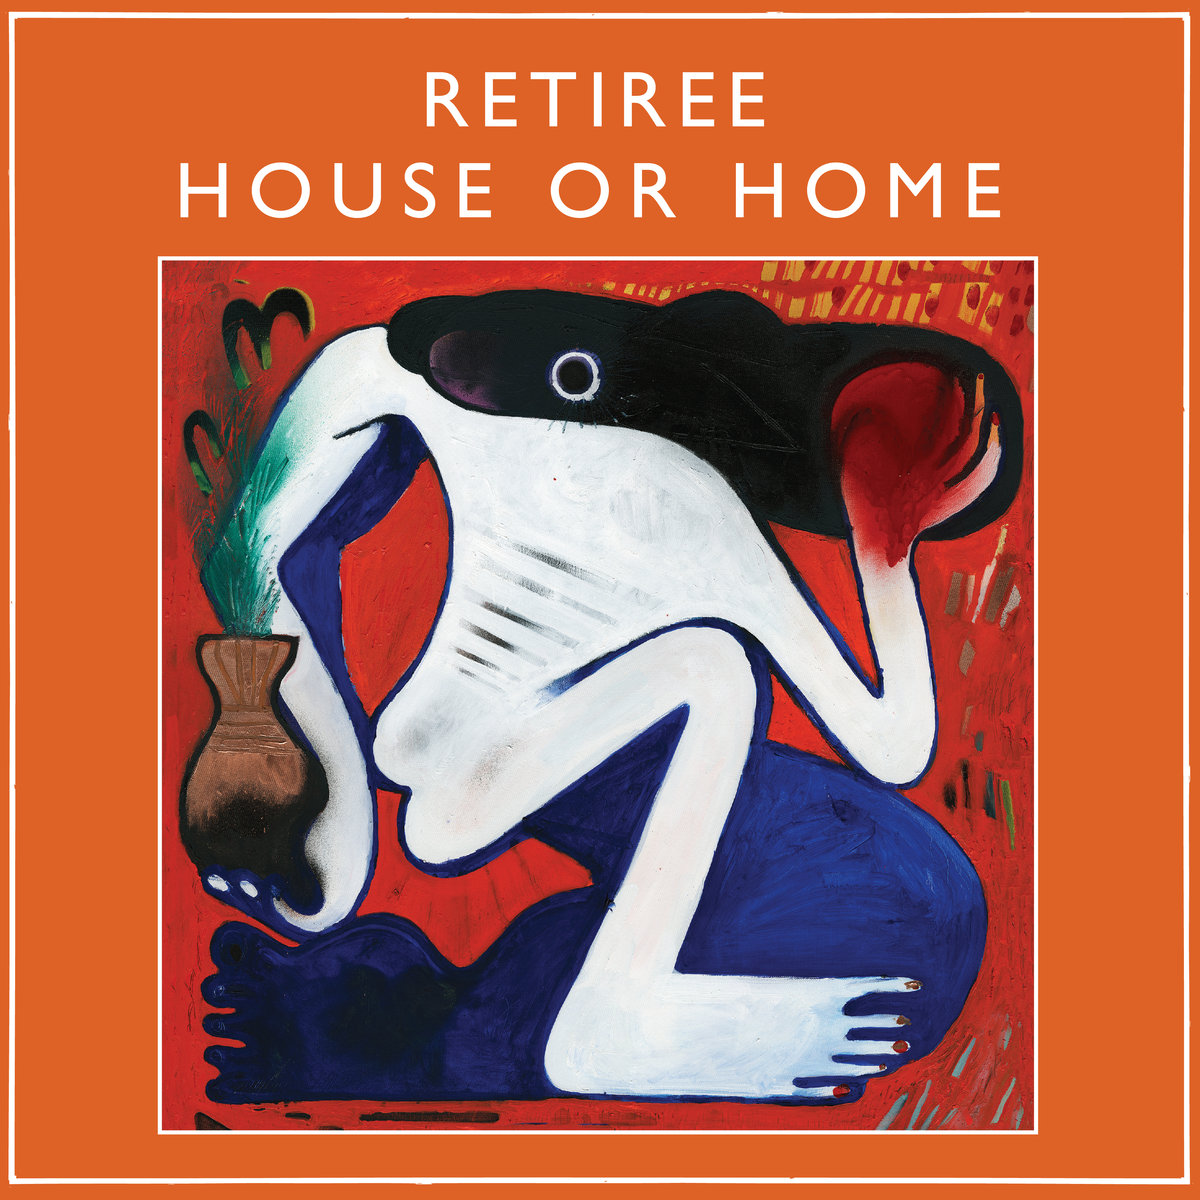 Retiree – House Or Home